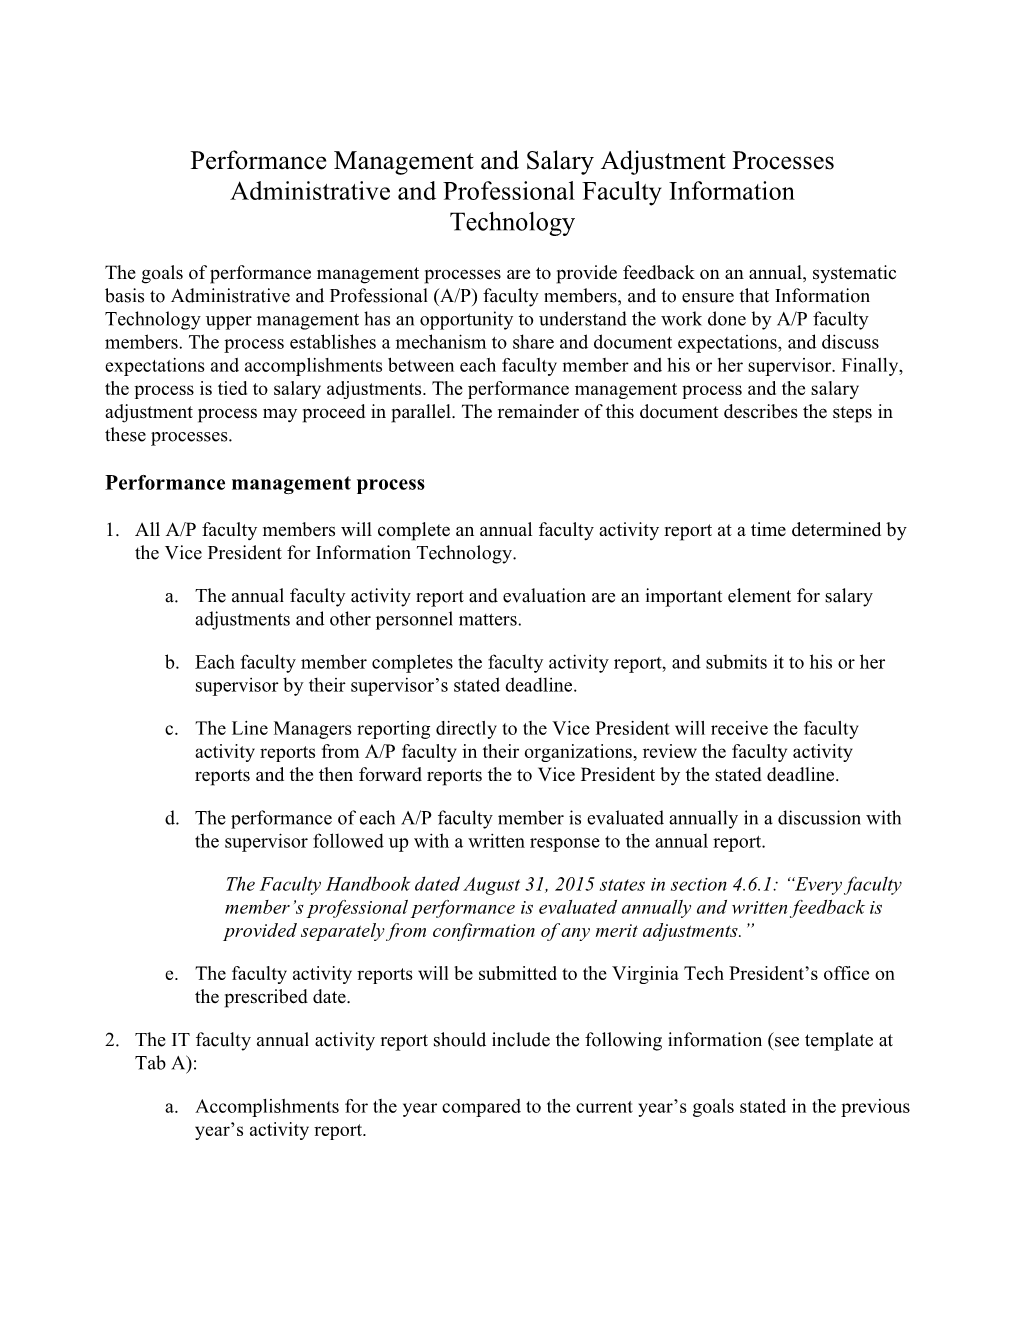 Faculty Activities Report and Salary Adjustment Processes for Administrative and Professional